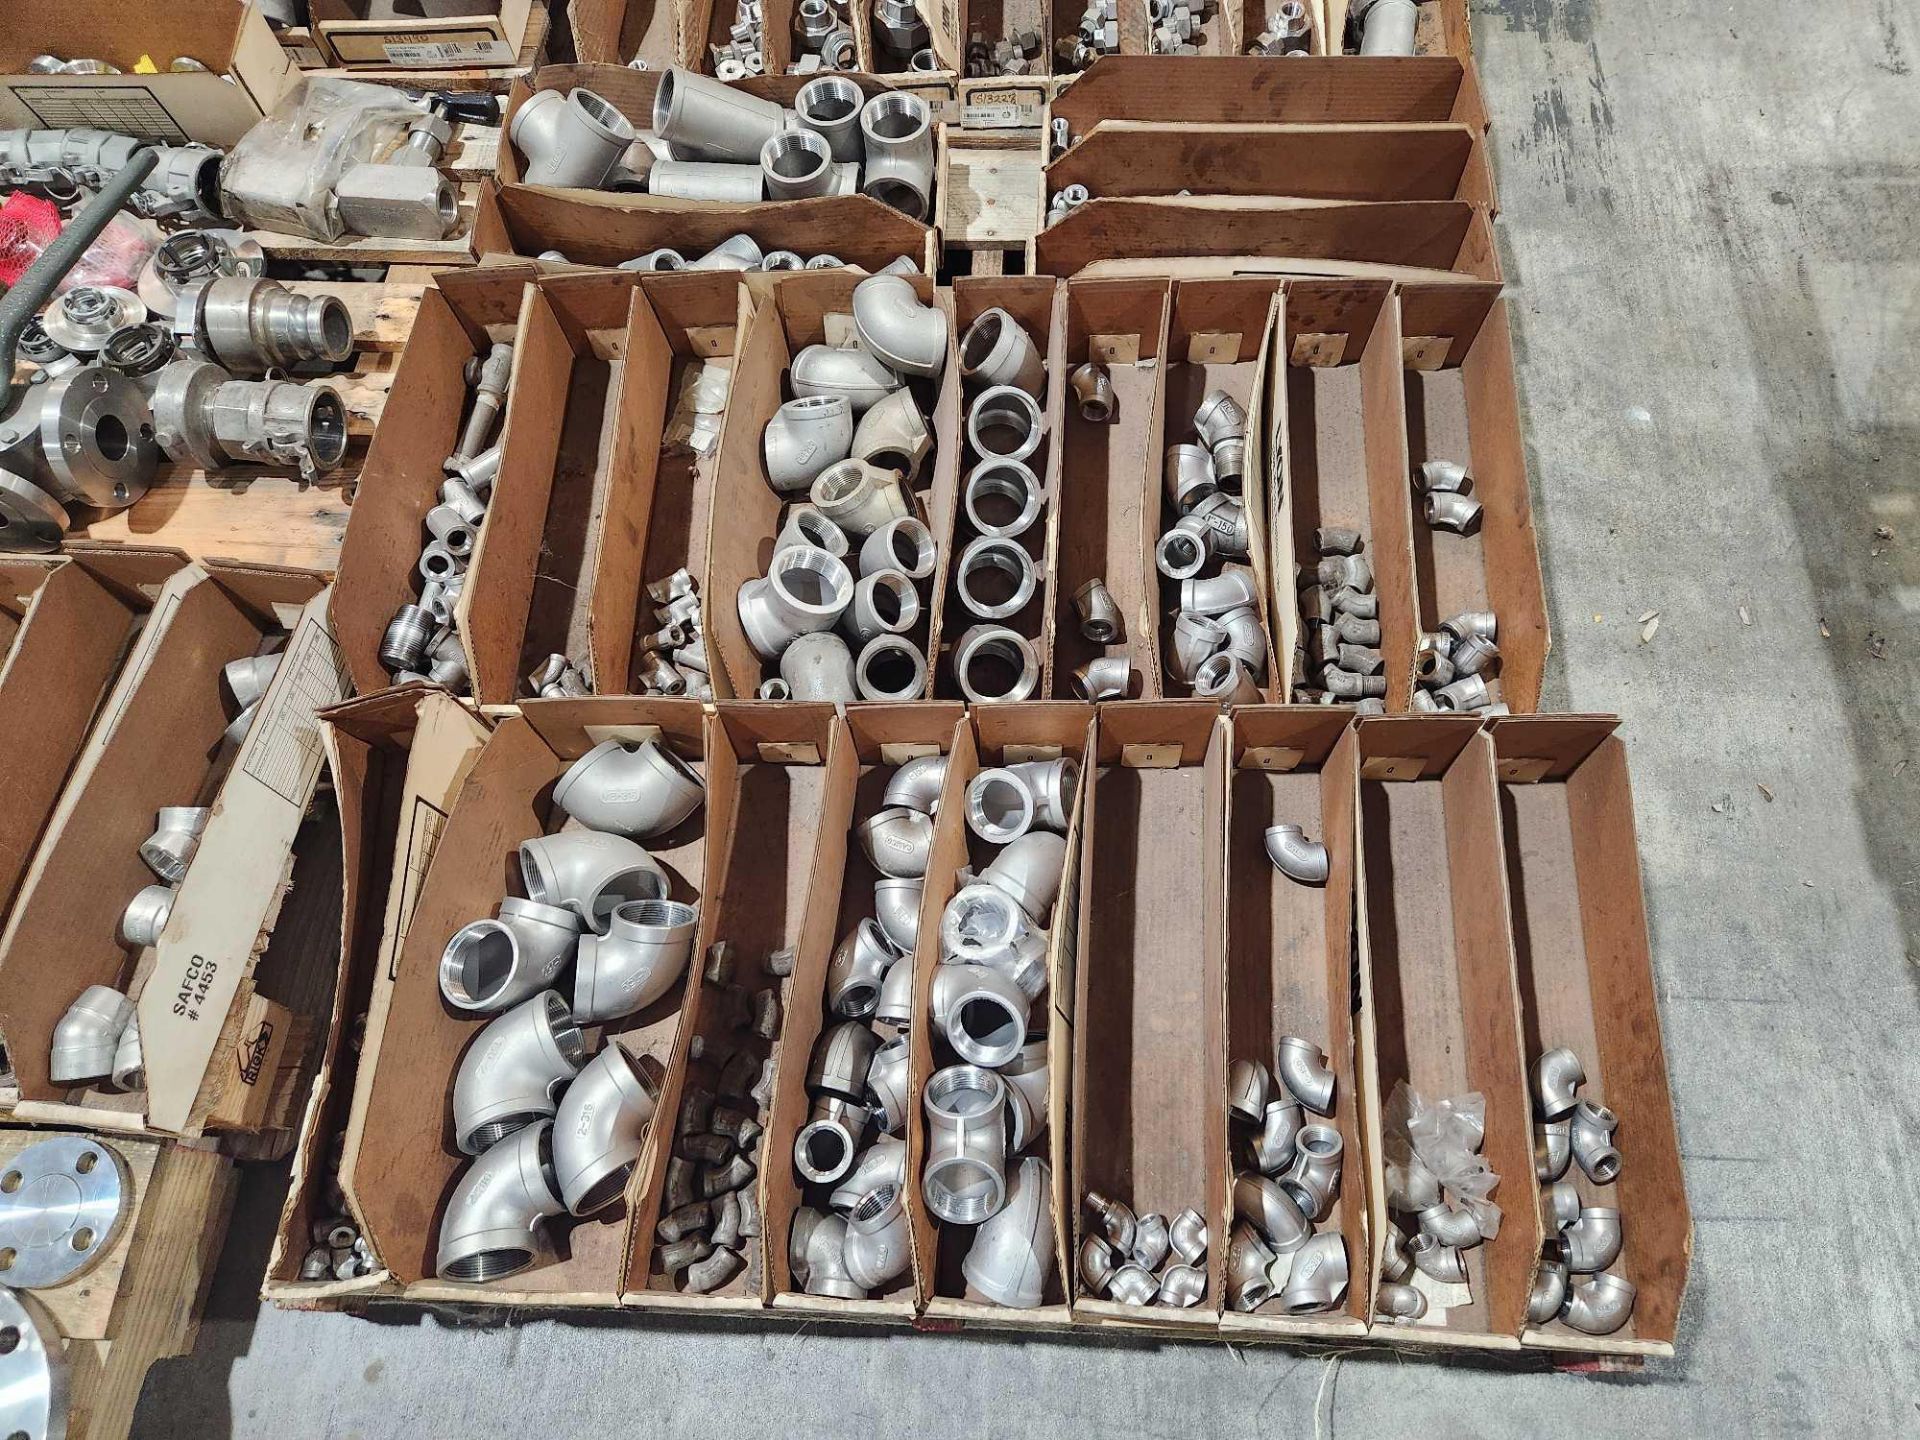 Lot asst stainless steel fittings, connectors, adapters, etc. (SORTED BY SIZE IN CARDBOARD BOXES), - Image 6 of 8